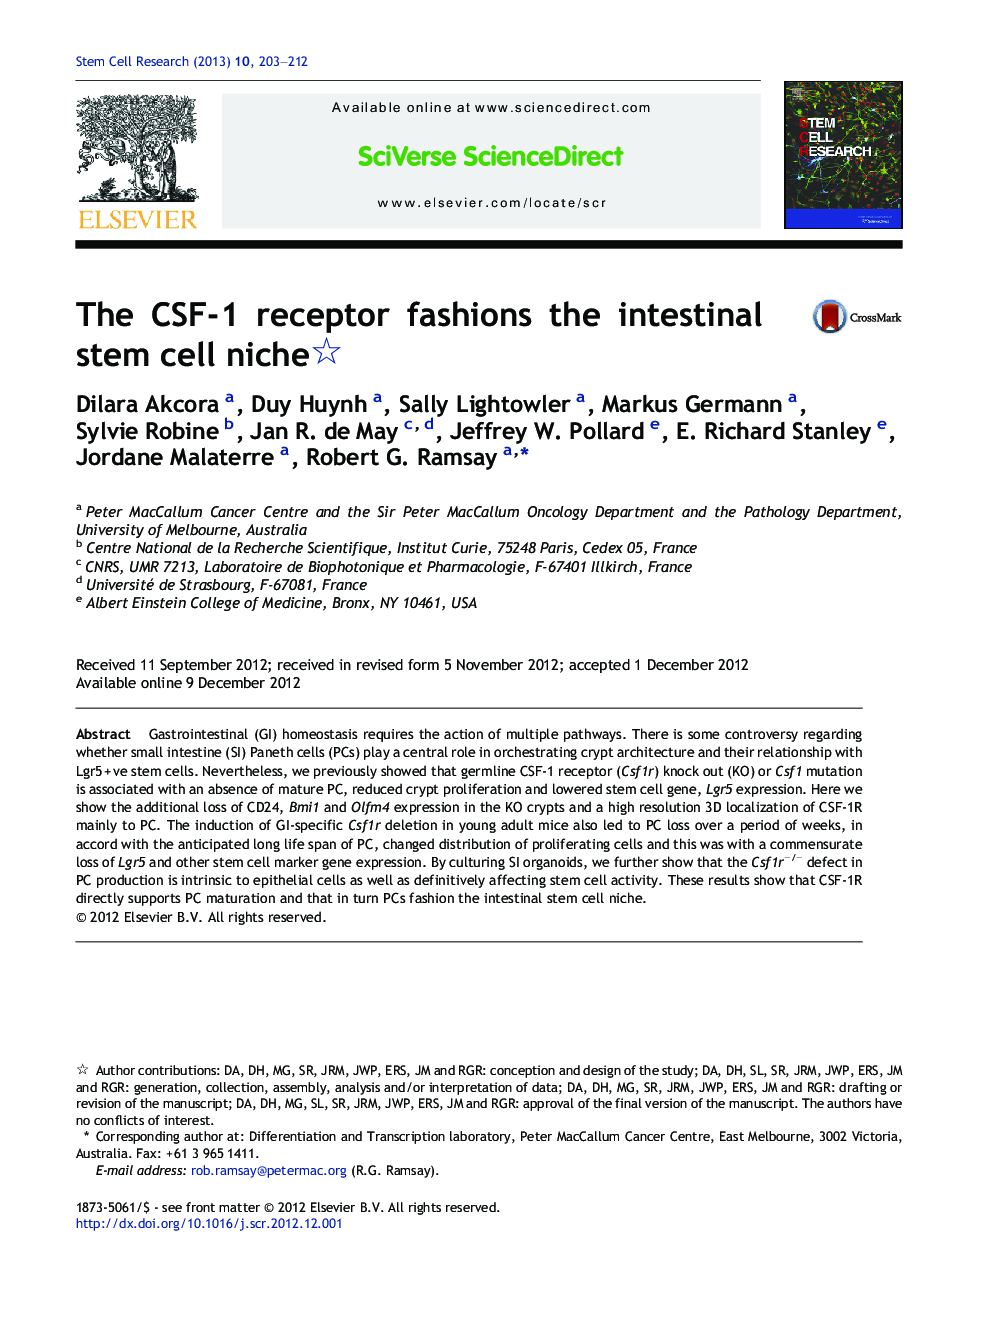 The CSF-1 receptor fashions the intestinal stem cell niche